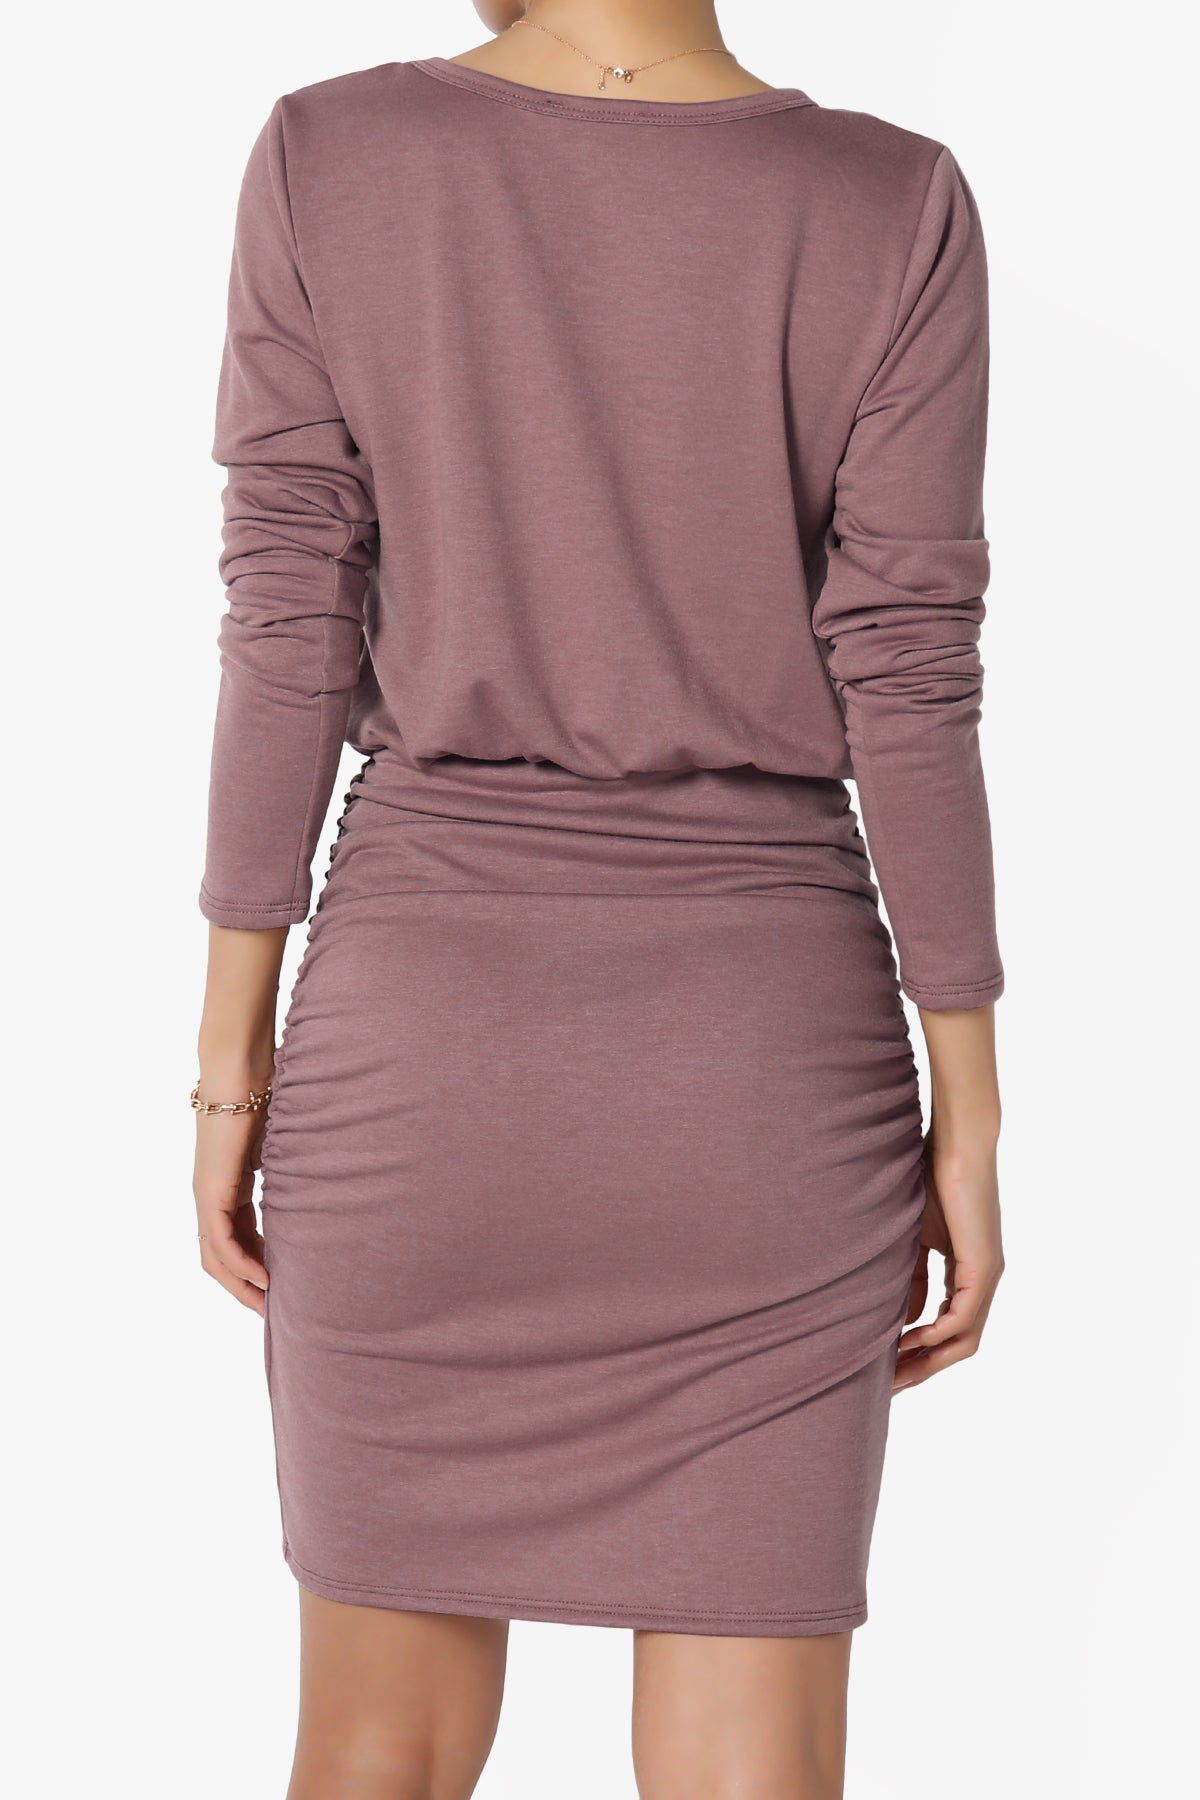 Prowl Ruched Long Sleeve T-Shirt Dress PLUS